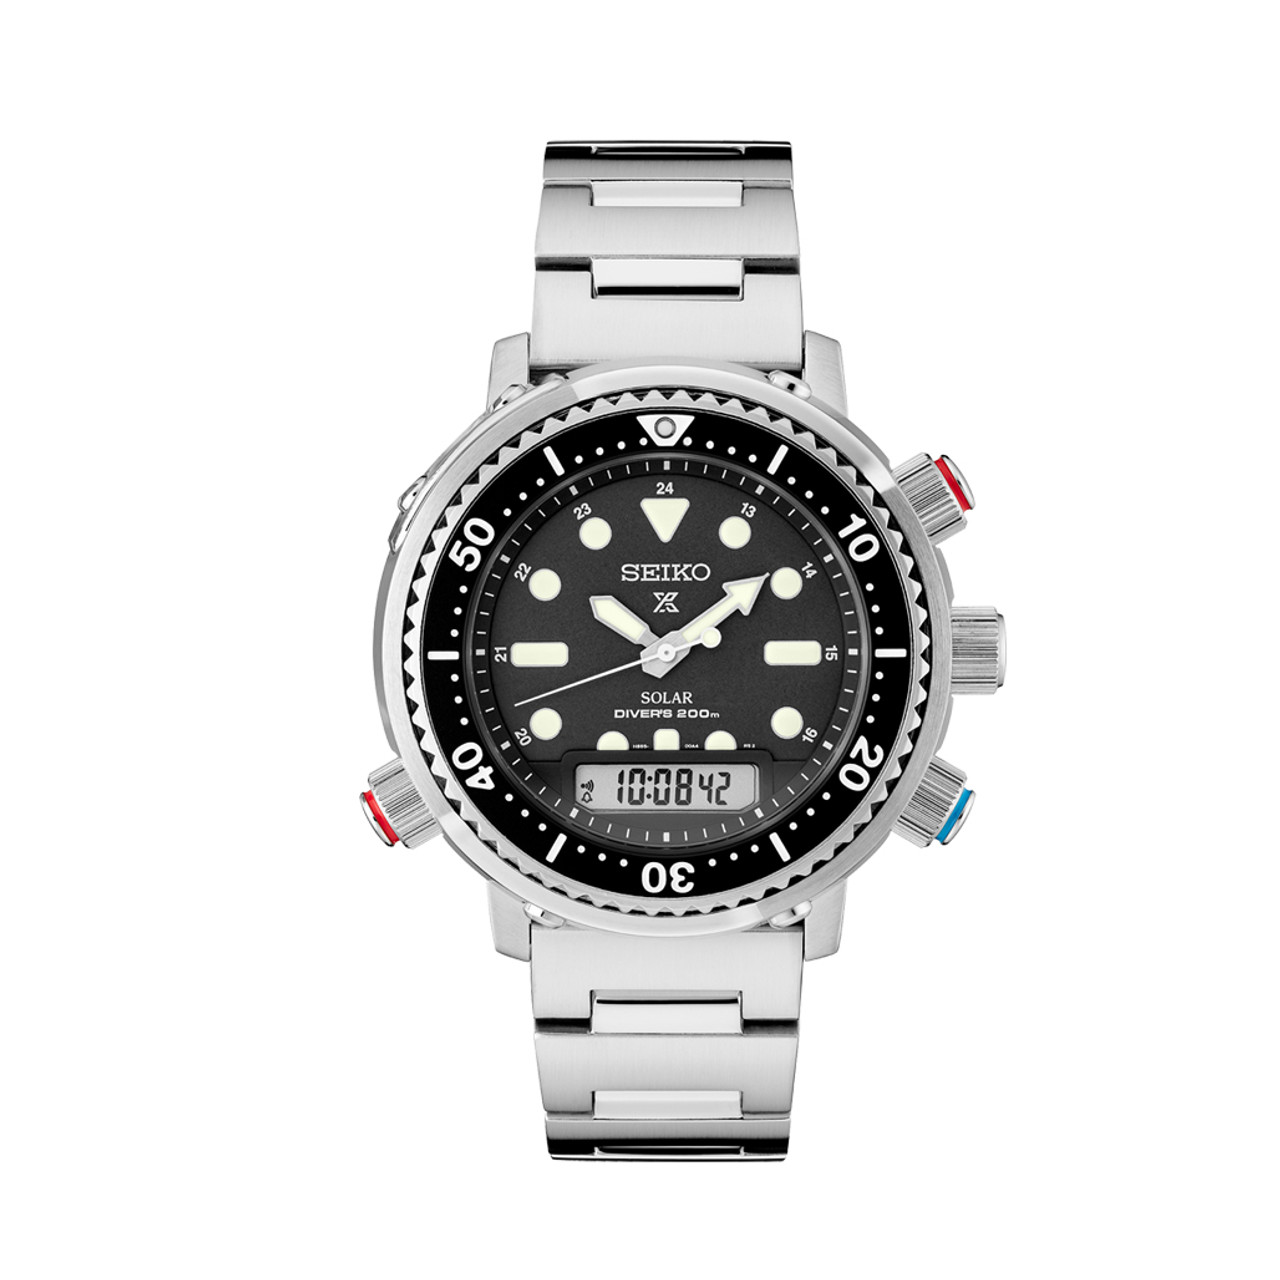 Seiko Prospex Solar Analog-Digital Dive Watch with Depth Meter, Water Temp  and Dive Log Functions #